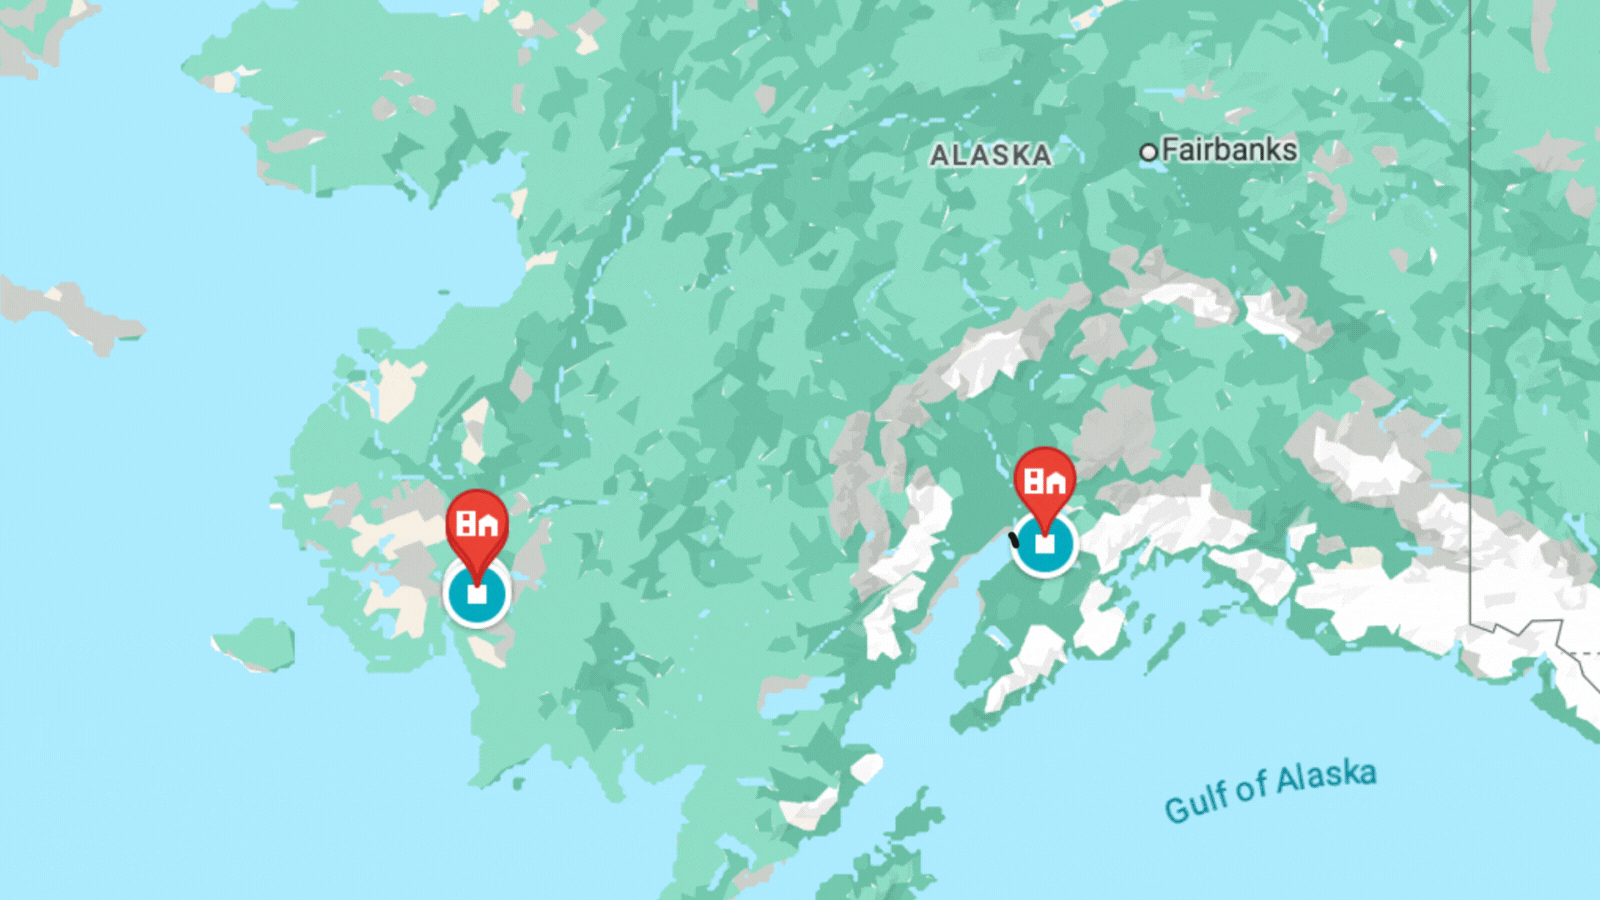 Alaska community deploys ARP grant-funded sensor network for seamless local air quality insights